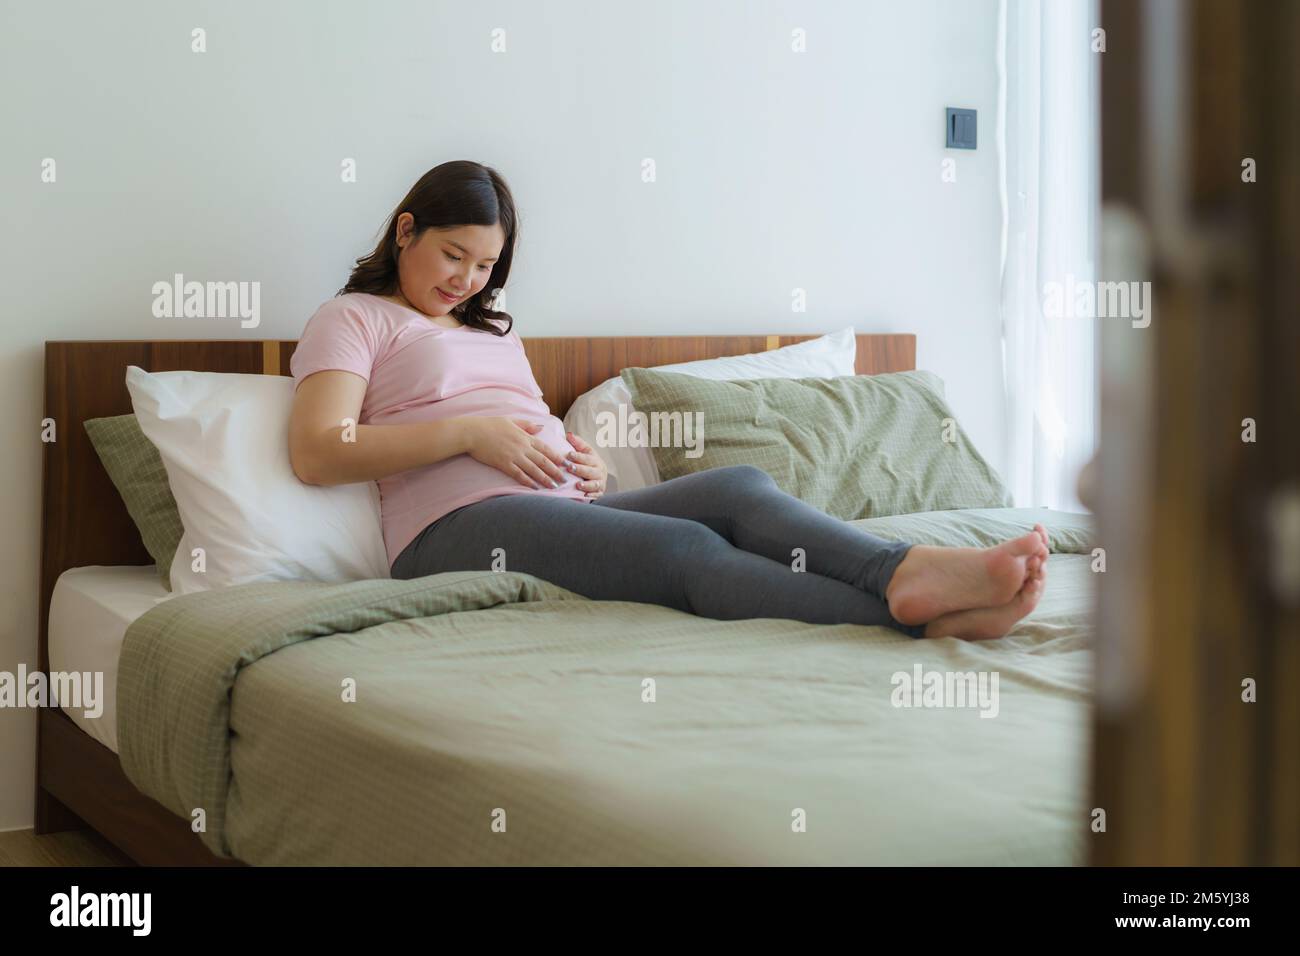 Pregnancy, people rest and expectation concept - Asian smiling happy pregnant woman sitting in bed and touching her belly at home. Stock Photo